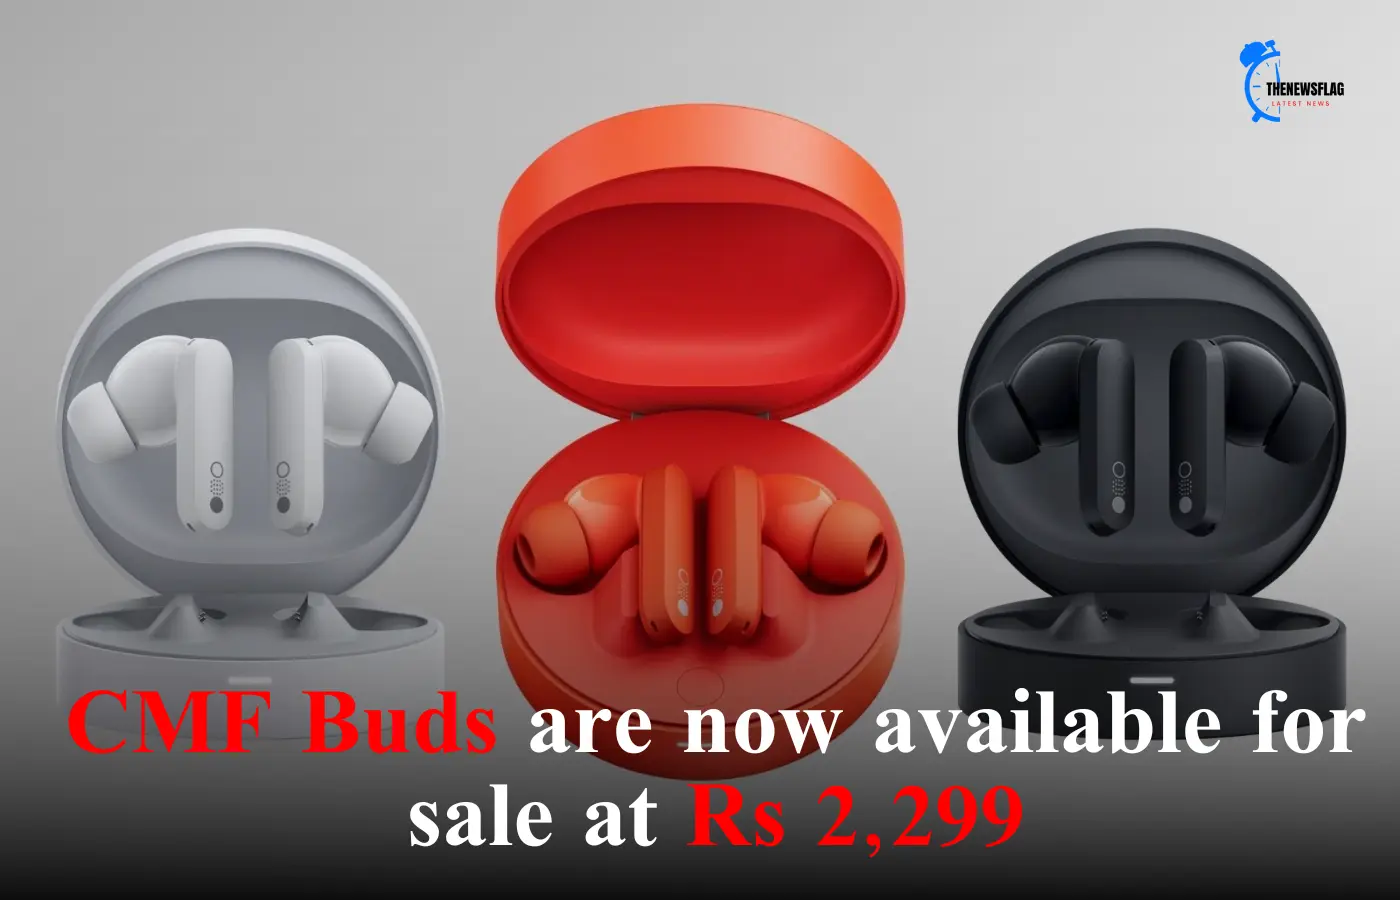 CMF Buds are now available for sale at Rs 2,299